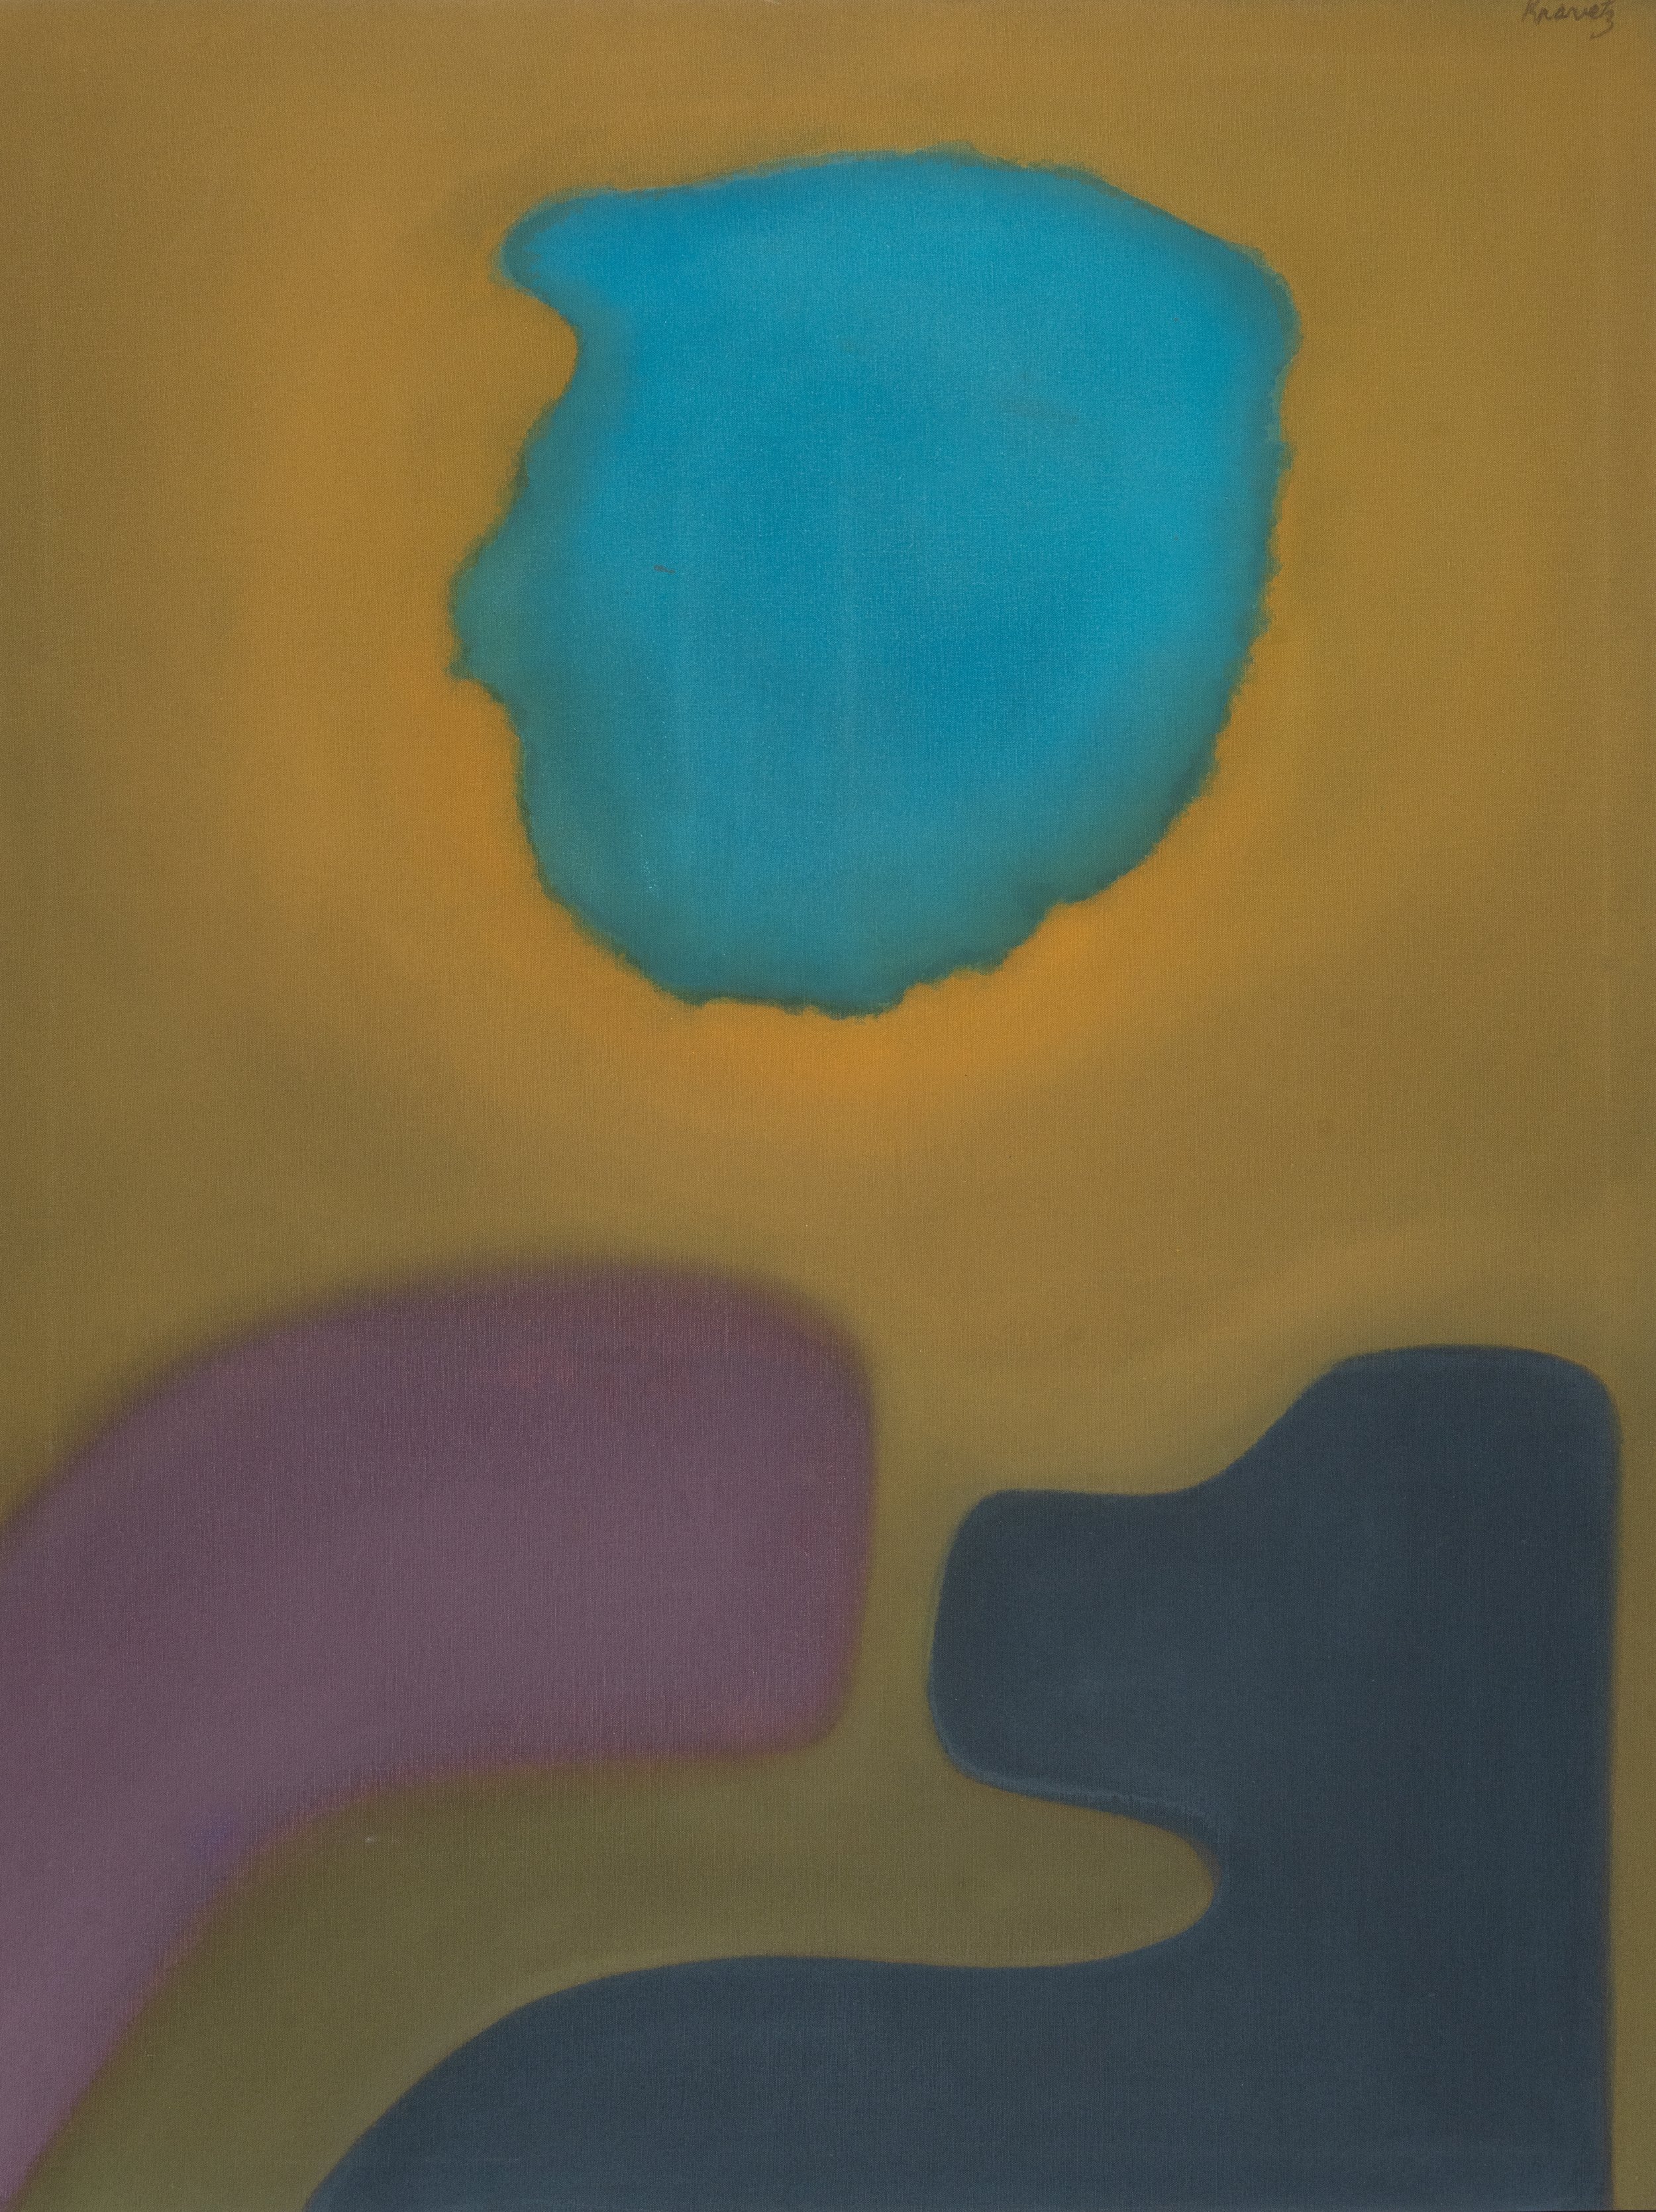 Frozen in Space, 1971, acrylic on canvas, 50x38 inches